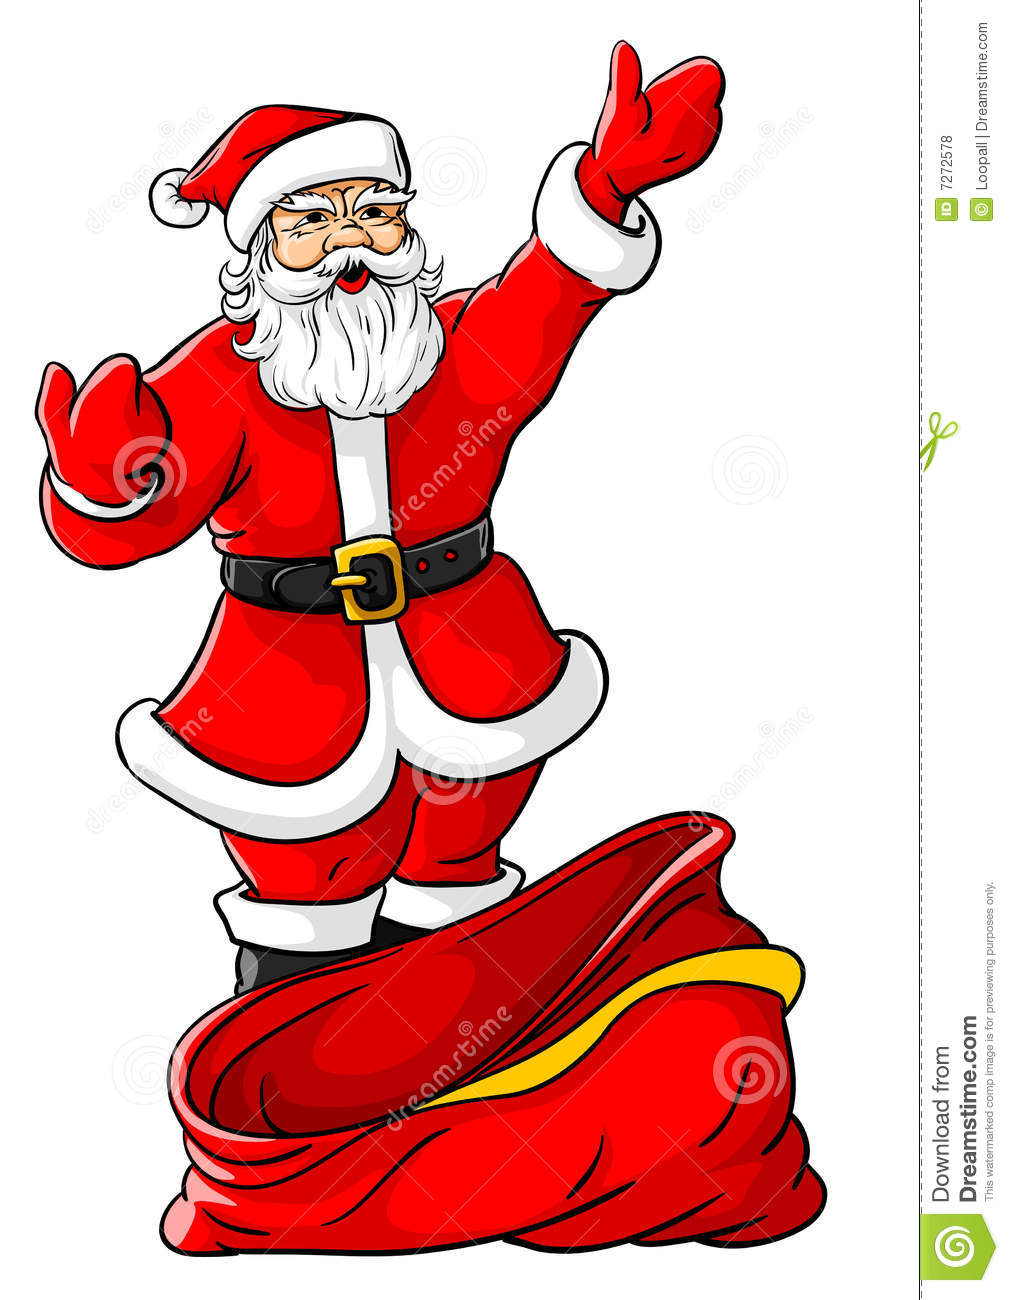 Vector Illustration Of Christmas Santa Claus With Big Empty Sack For